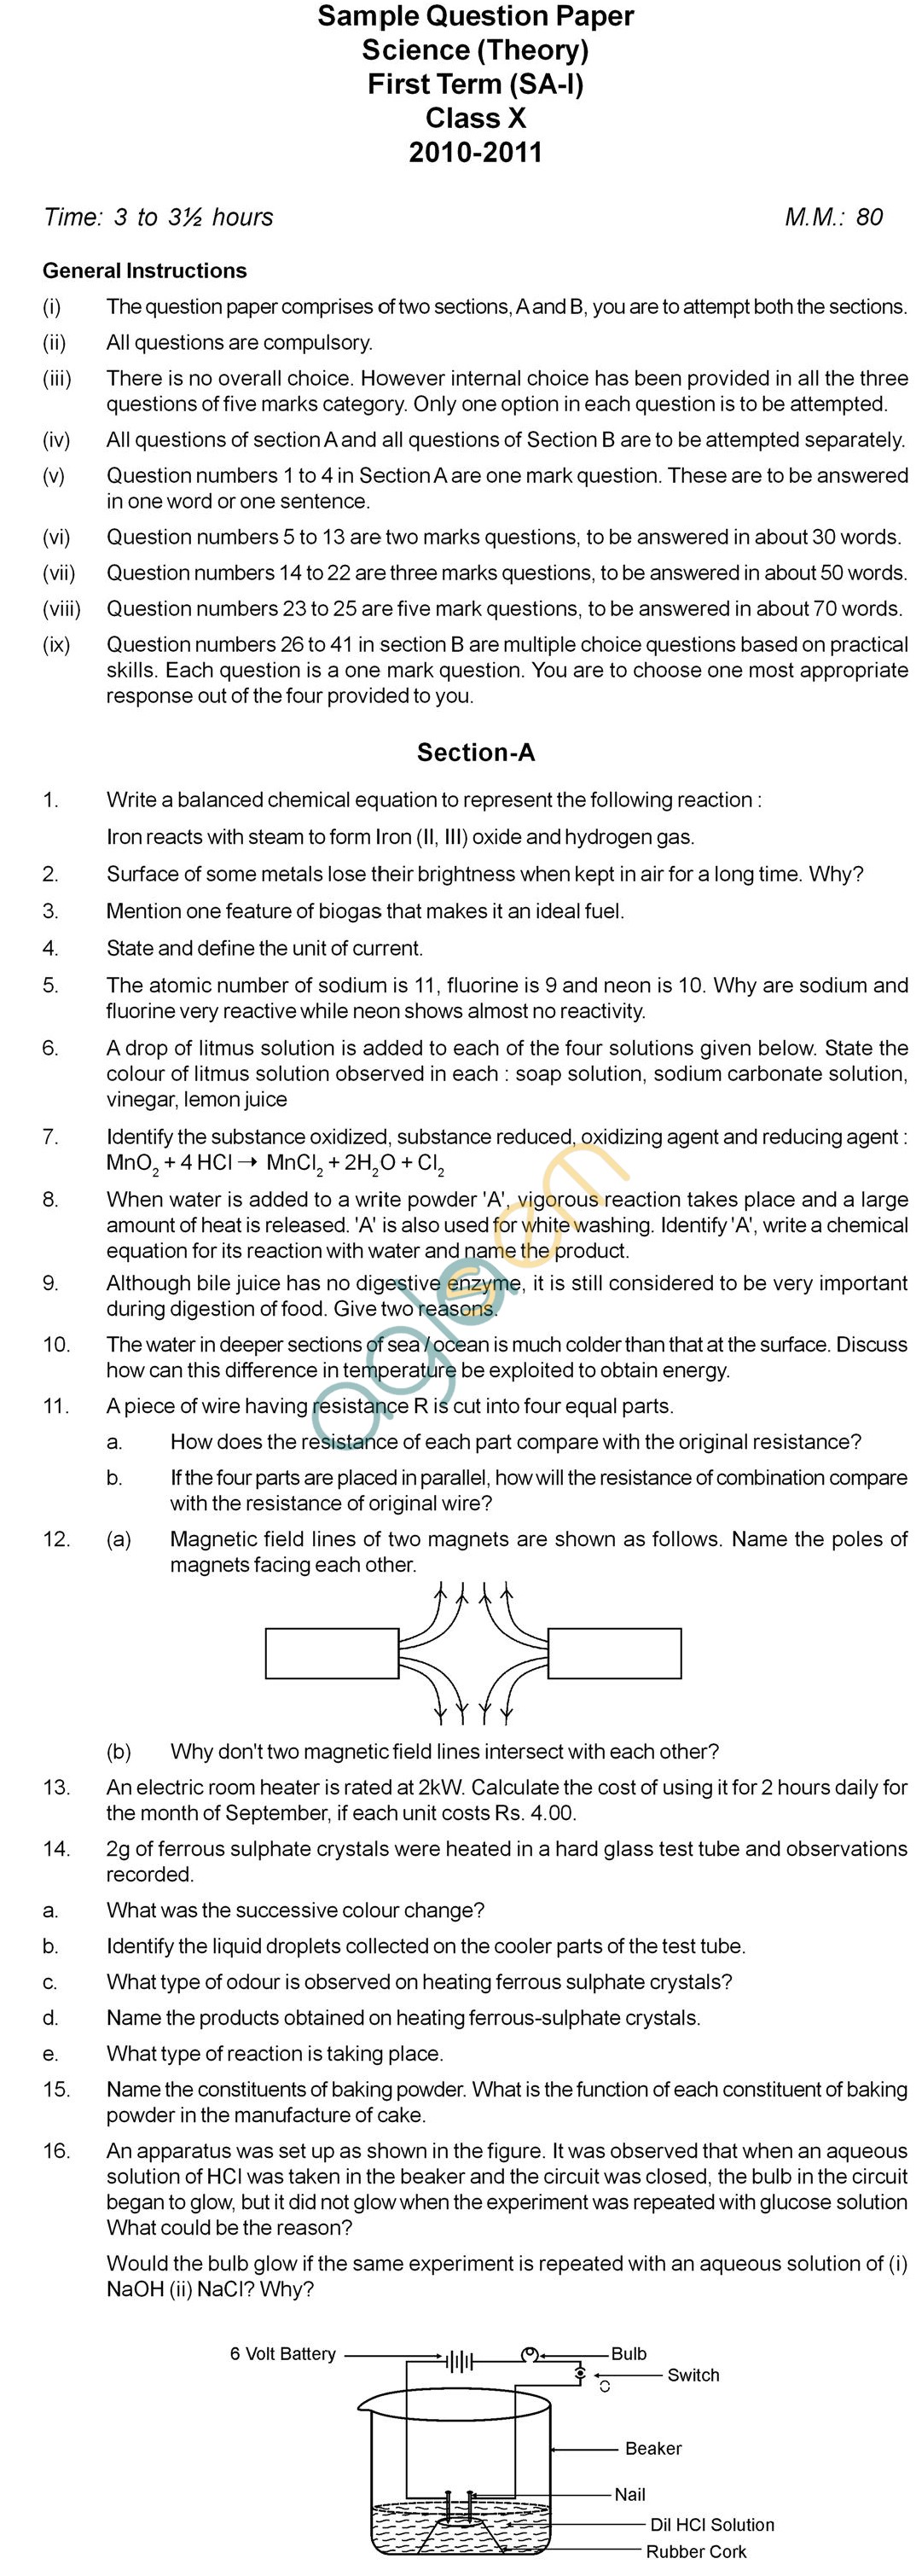 CBSE Board Exam 2013 Sample Papers (SA1) Class X - Science